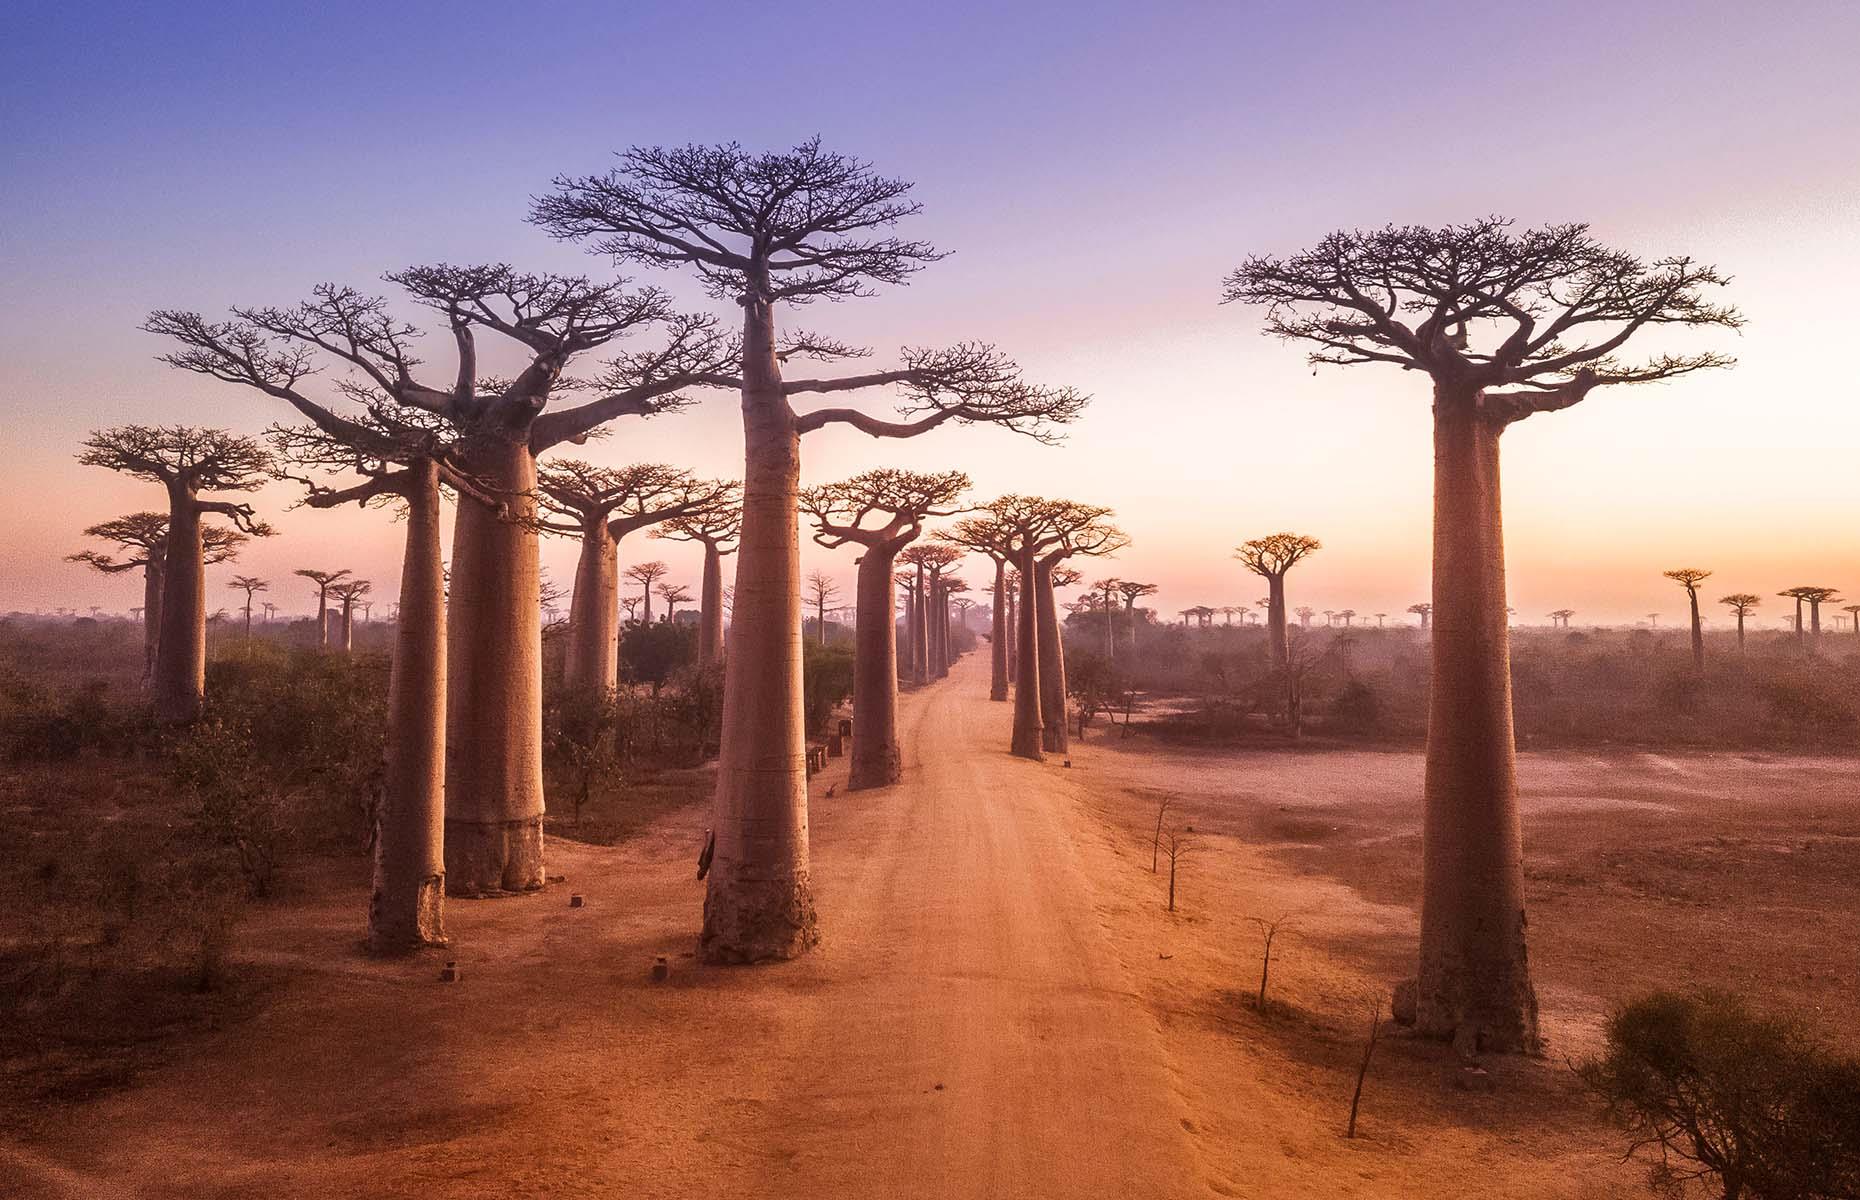 This row of fat-bottomed baobab trees is as bizarre and beguiling as the island’s tangerine-eyed lemurs, and probably just as frequently photographed. The Avenue of the Baobabs, on a dirt road between Morondava and Belon'i Tsiribihina in western Madagascar, is made up of majestic centuries-old trees, reaching up to 100 feet (30m).